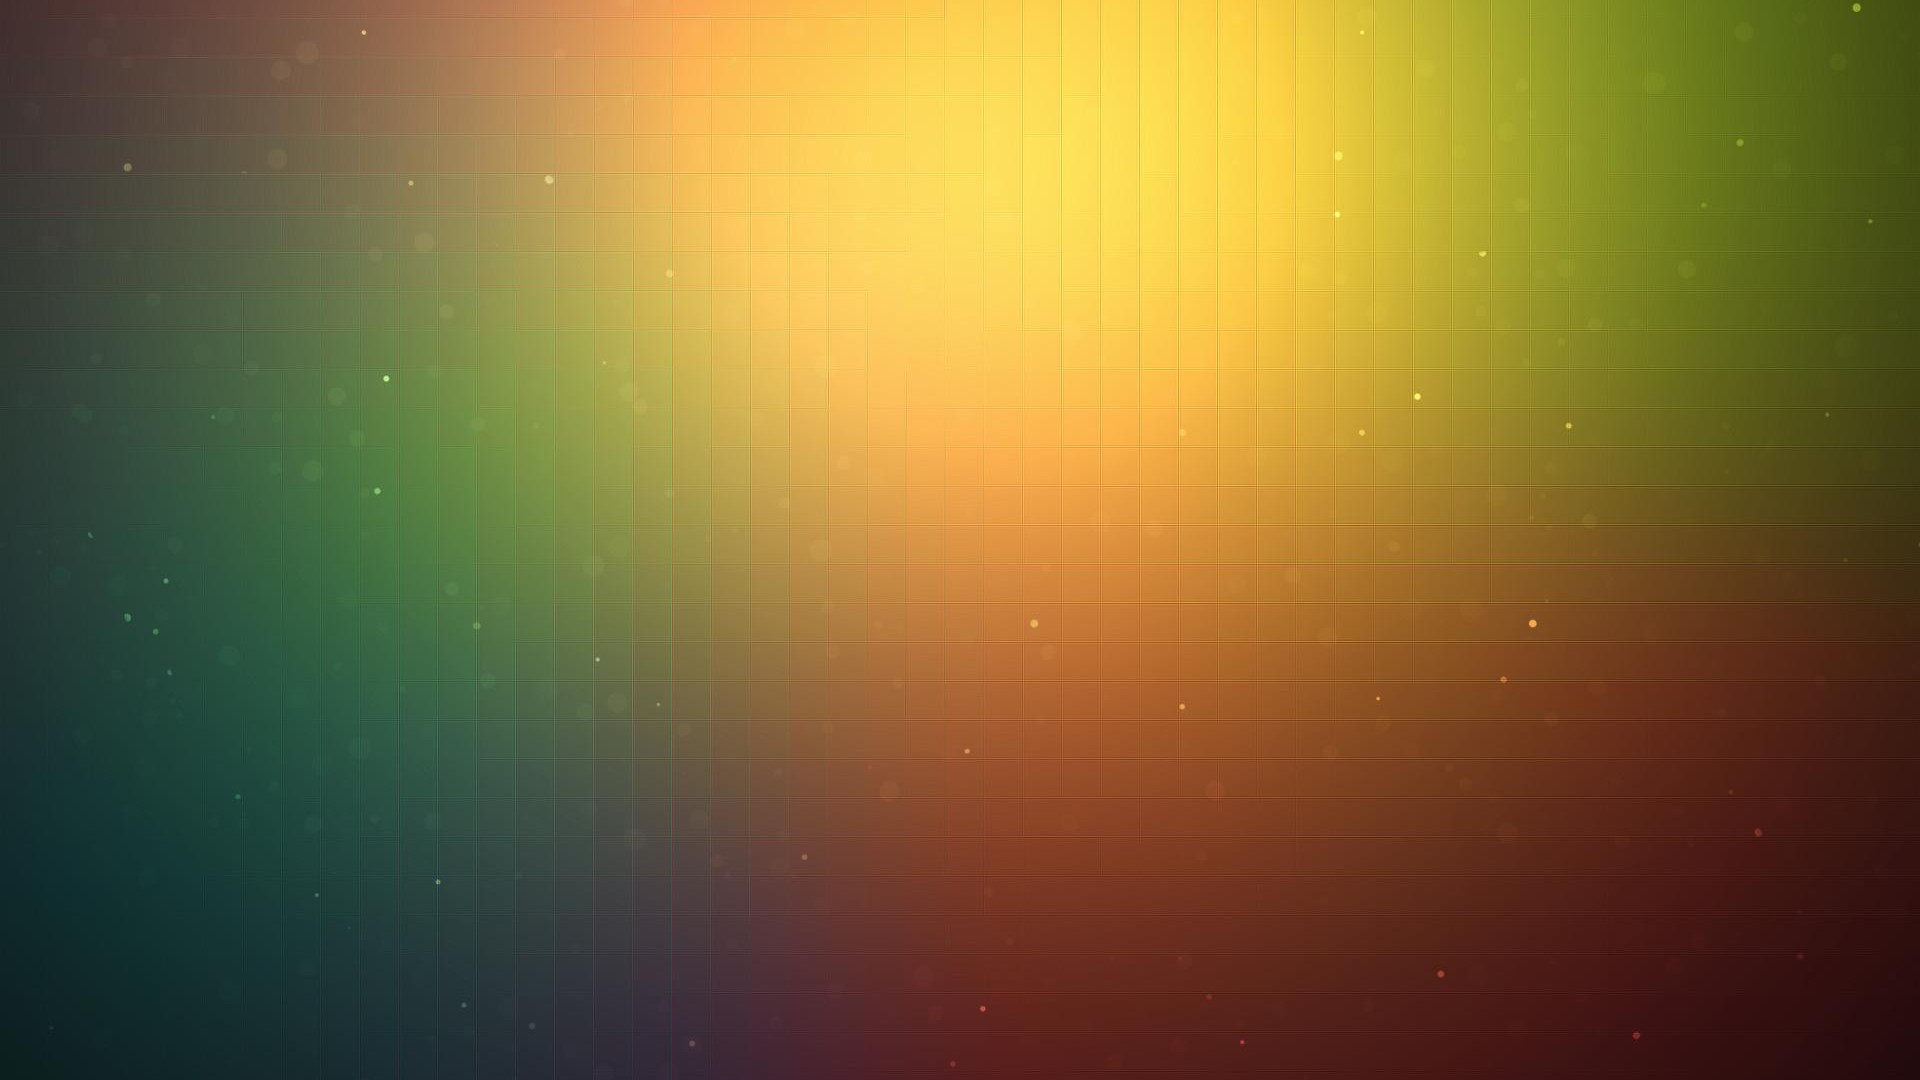 Simple Backgrounds wallpaper 1920x1080 47275